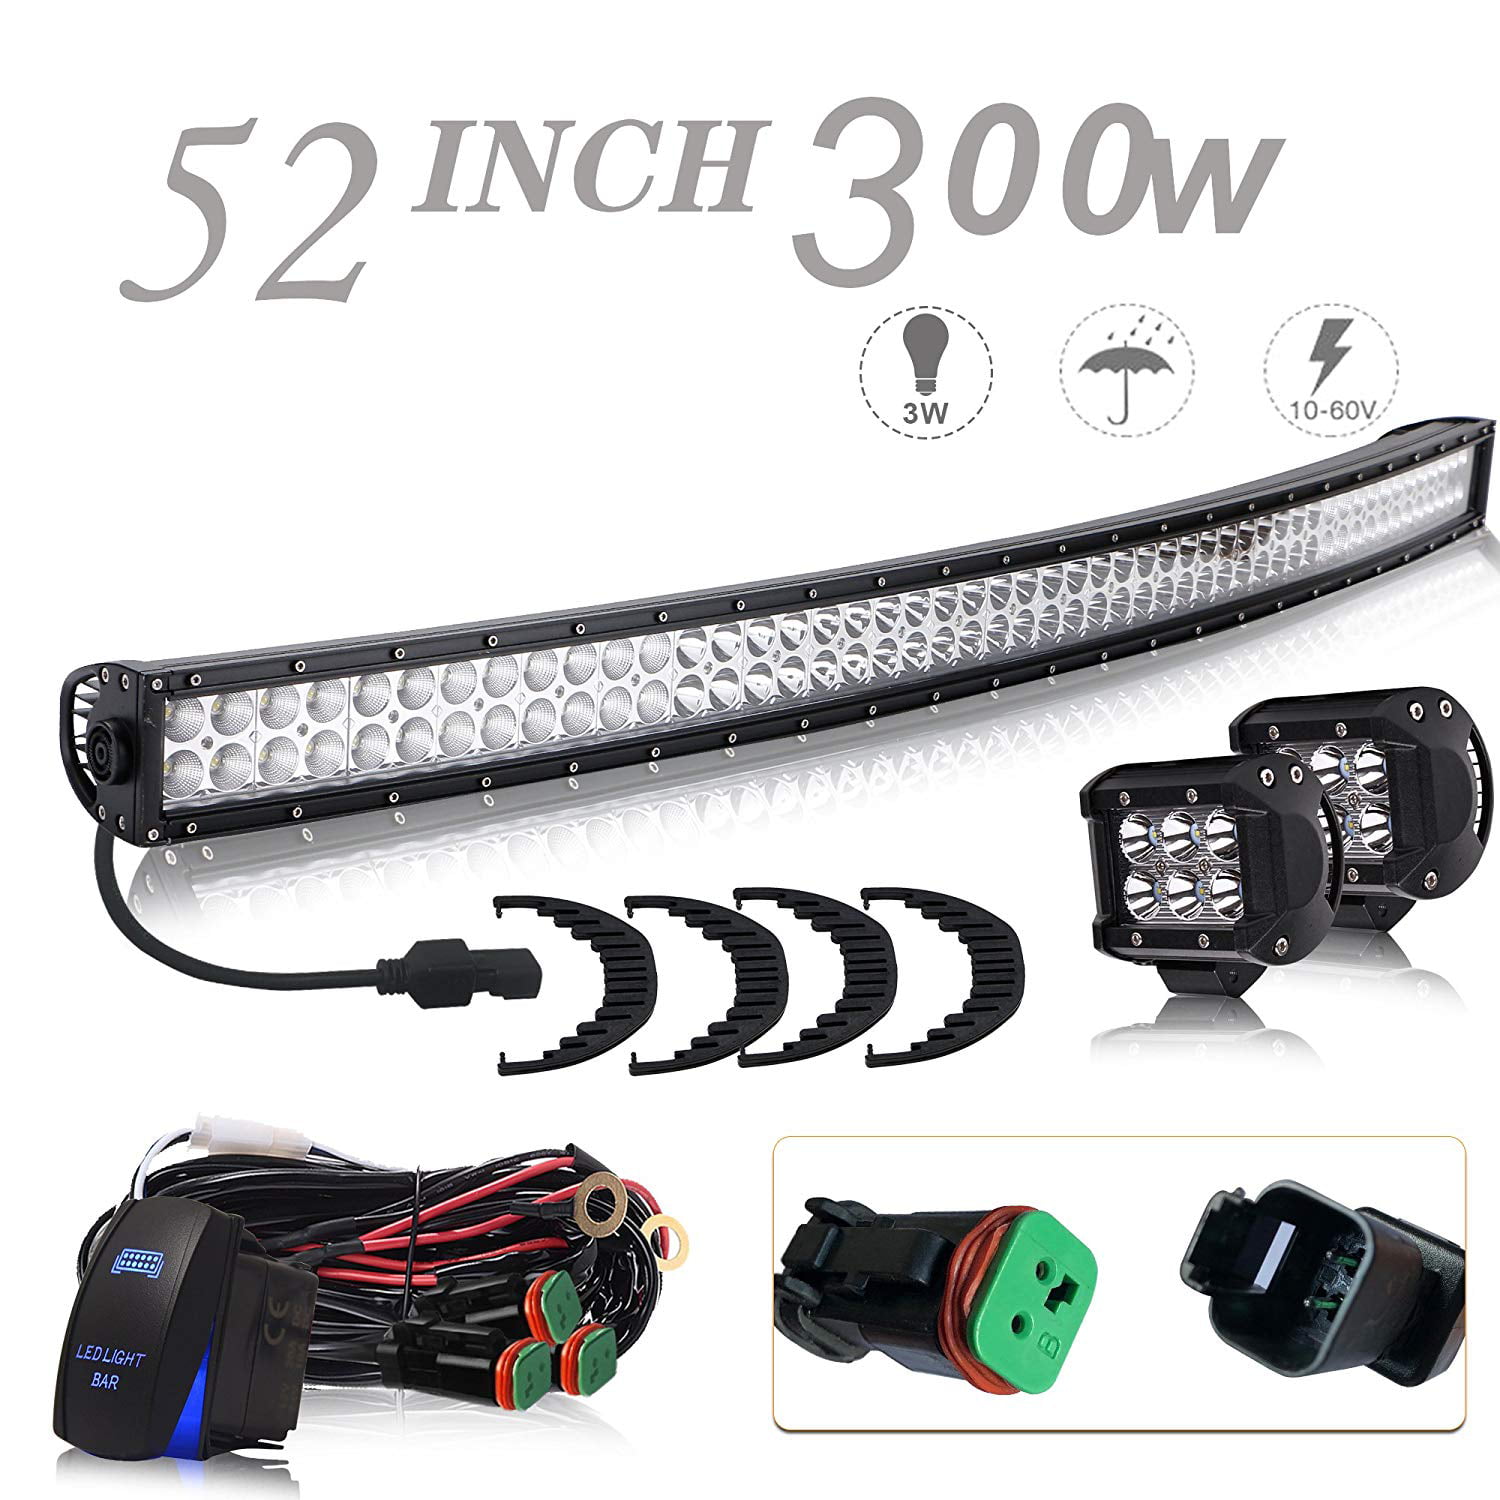 52"in 300W LED Work Light Bar F&S Combo fit Boat Offroad 4WD SUV UTE JEEP 50/54" 